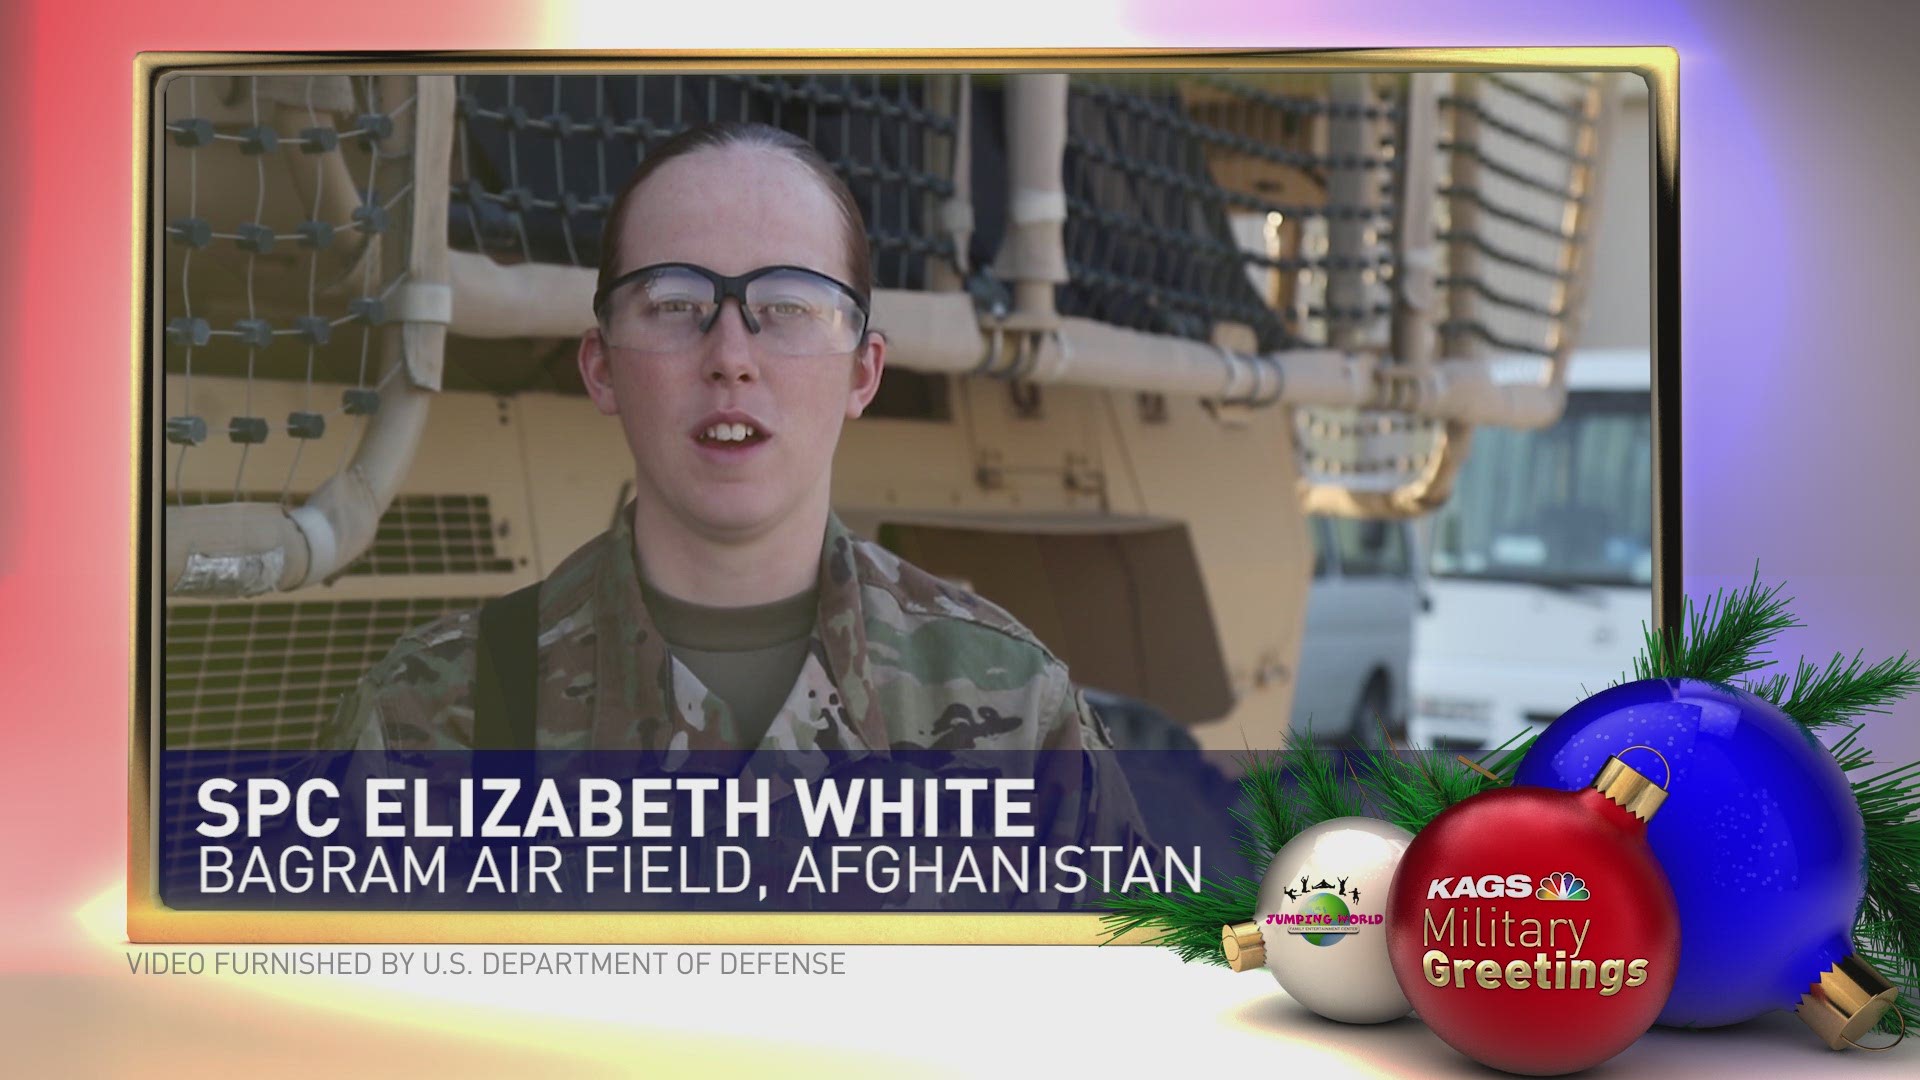 Jumping World presents Military greetings from Jeman McFadden & Family and SPC Elizabeth White